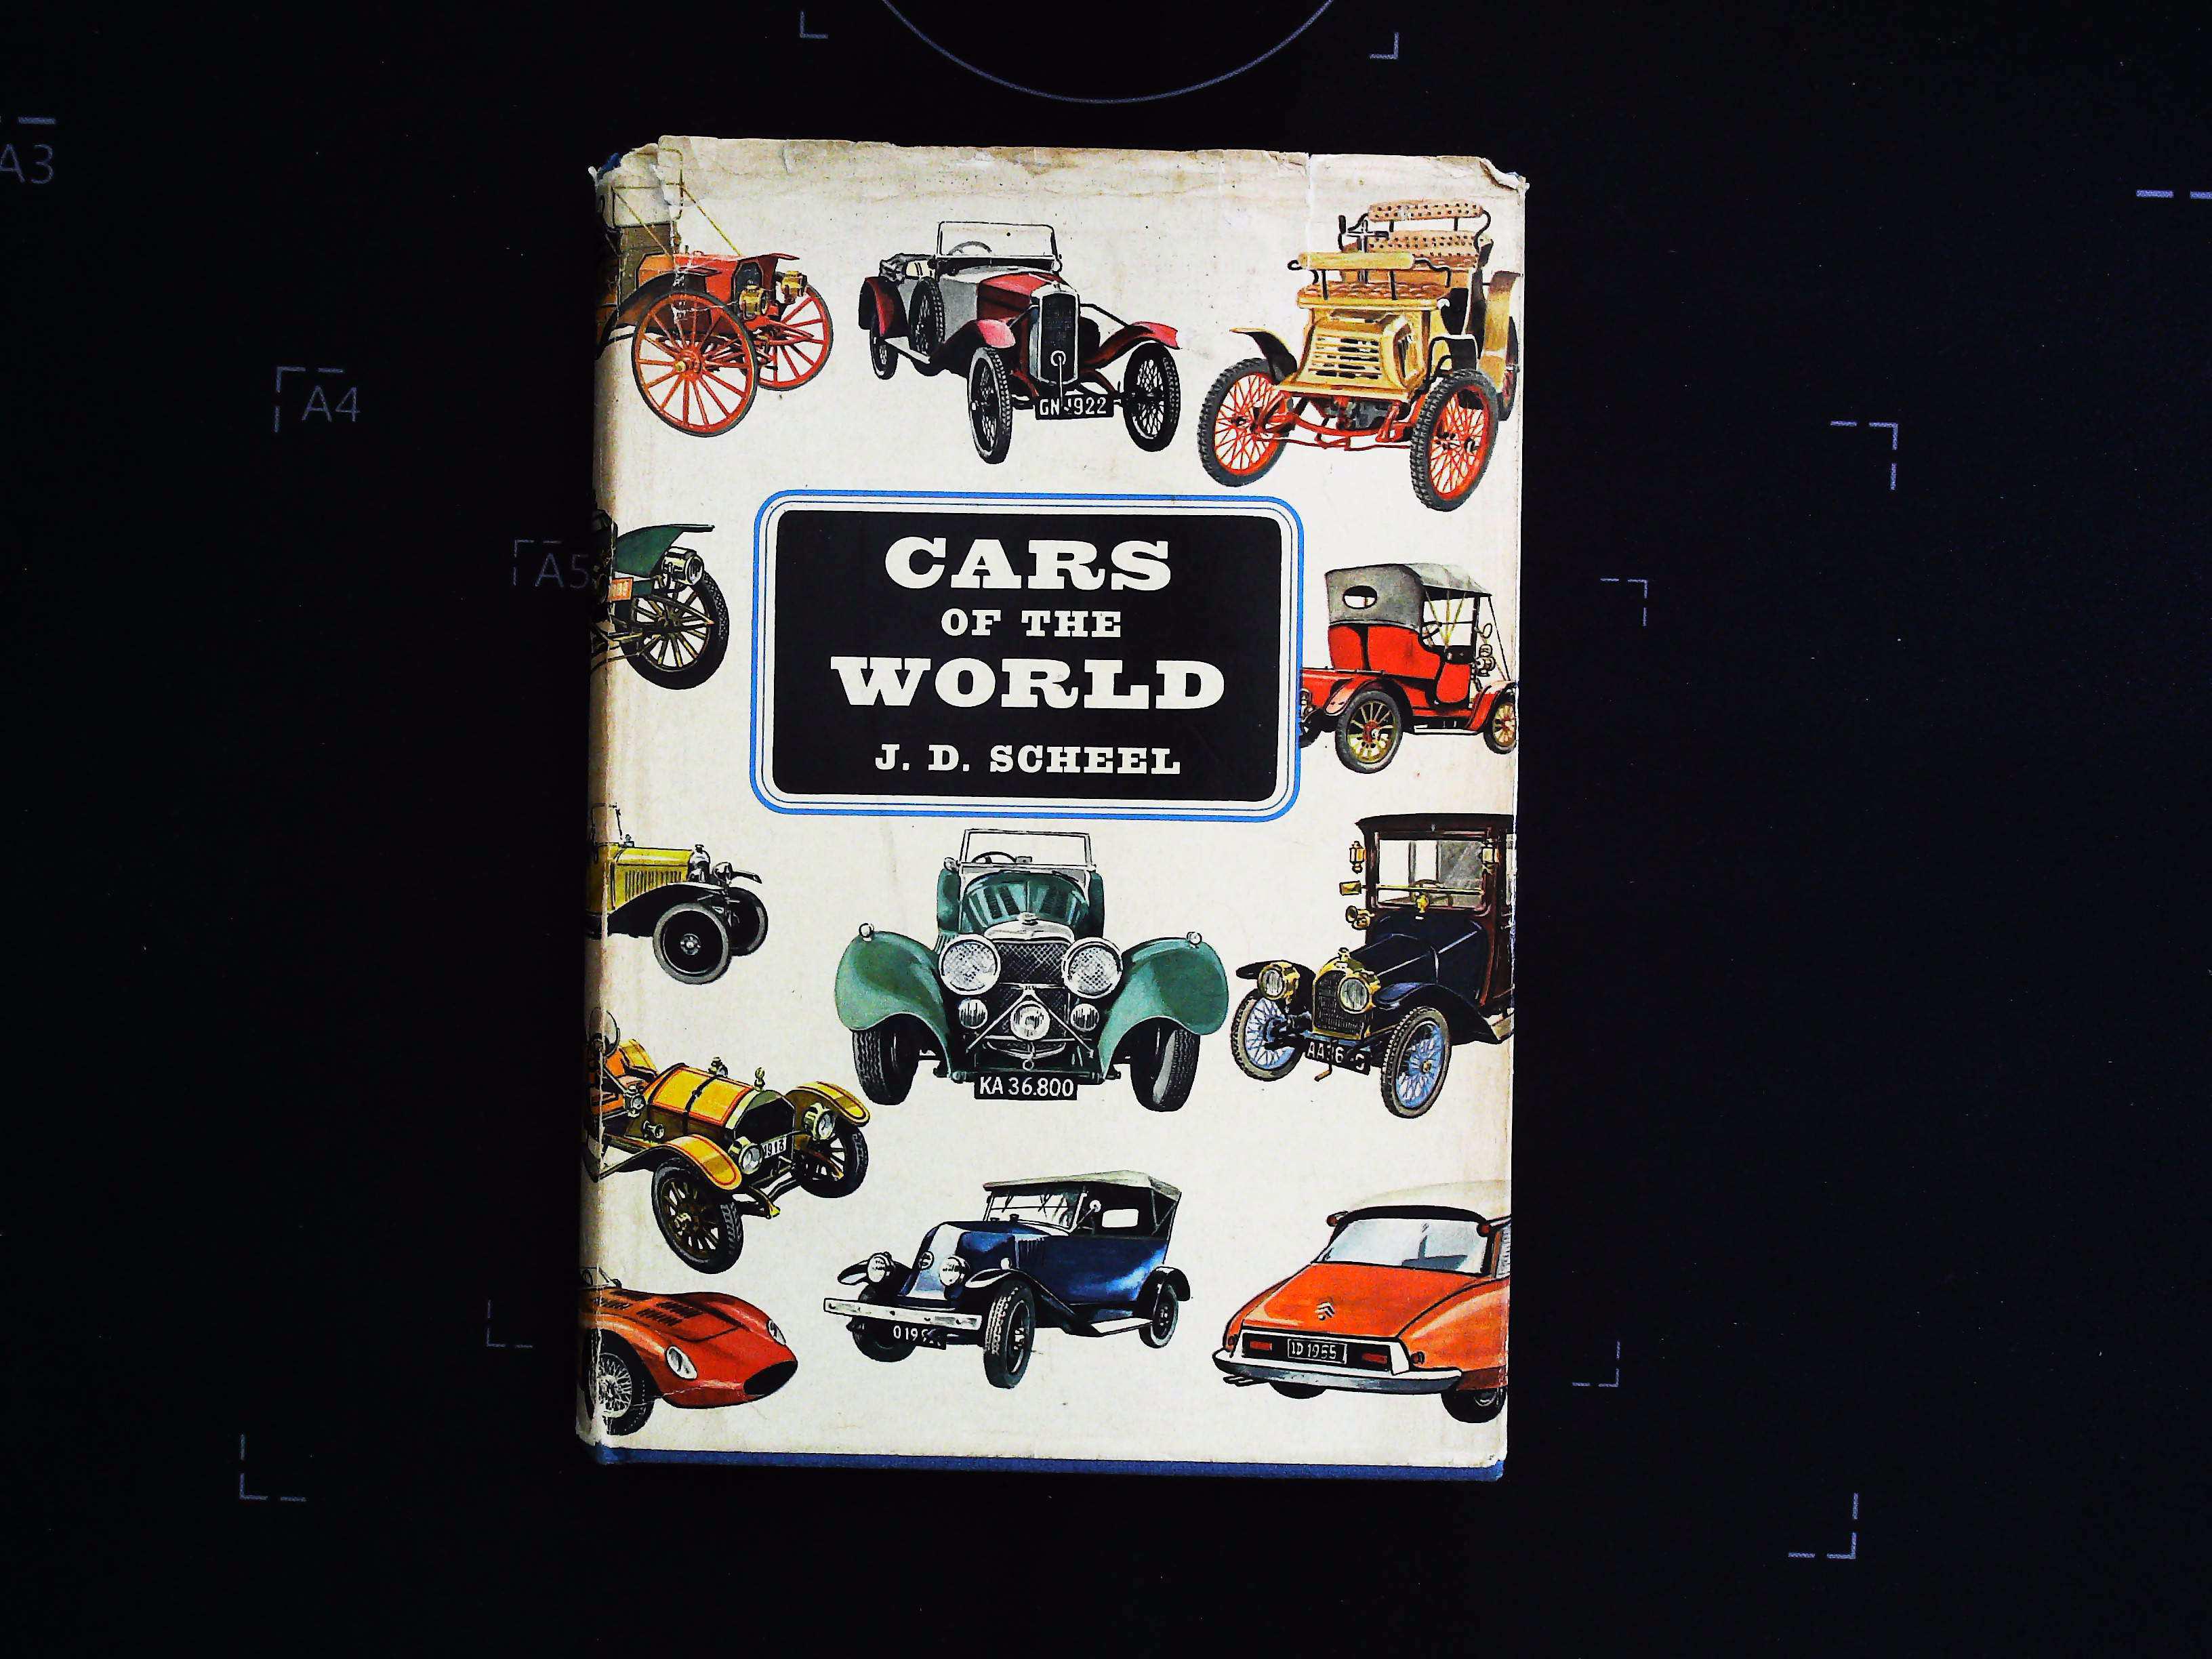 X 2 J. D. Scheel Cars Of The World hardback books Published 1963 Methuen And Co. Ltd. 1- In good - Image 4 of 6